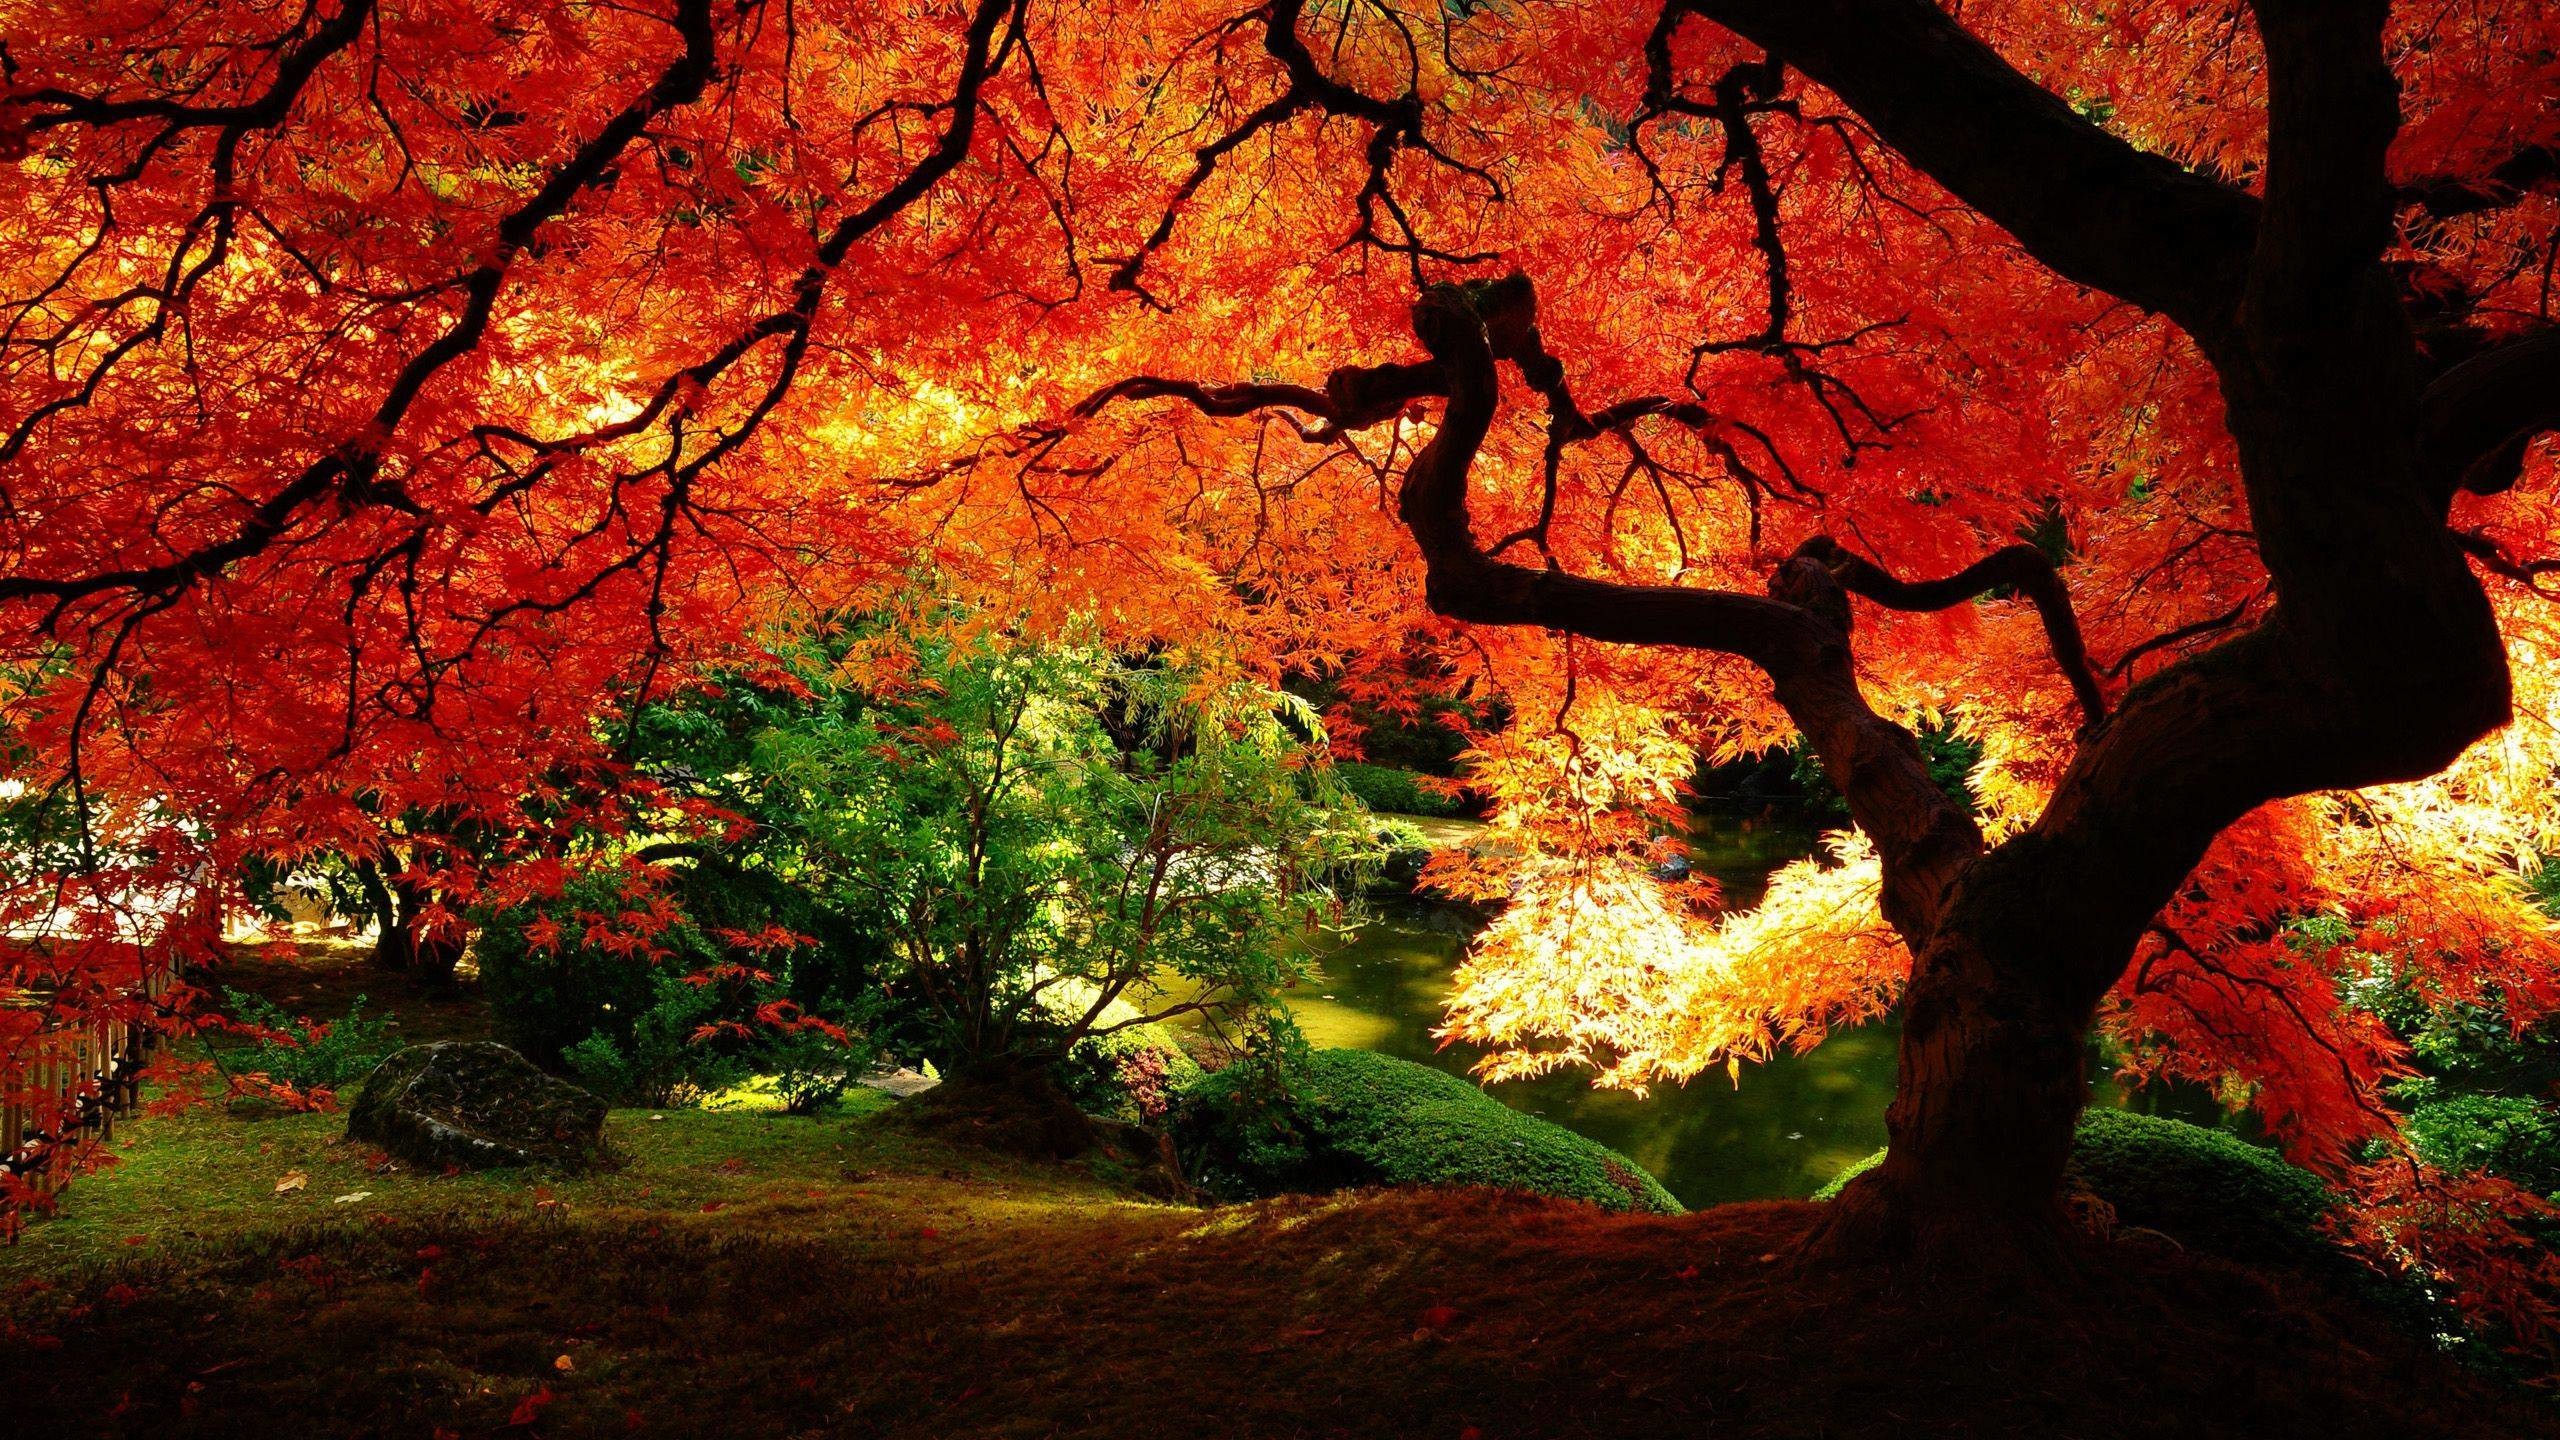 2560x1440 Autumn Wallpaper Android Apps on Google Play 